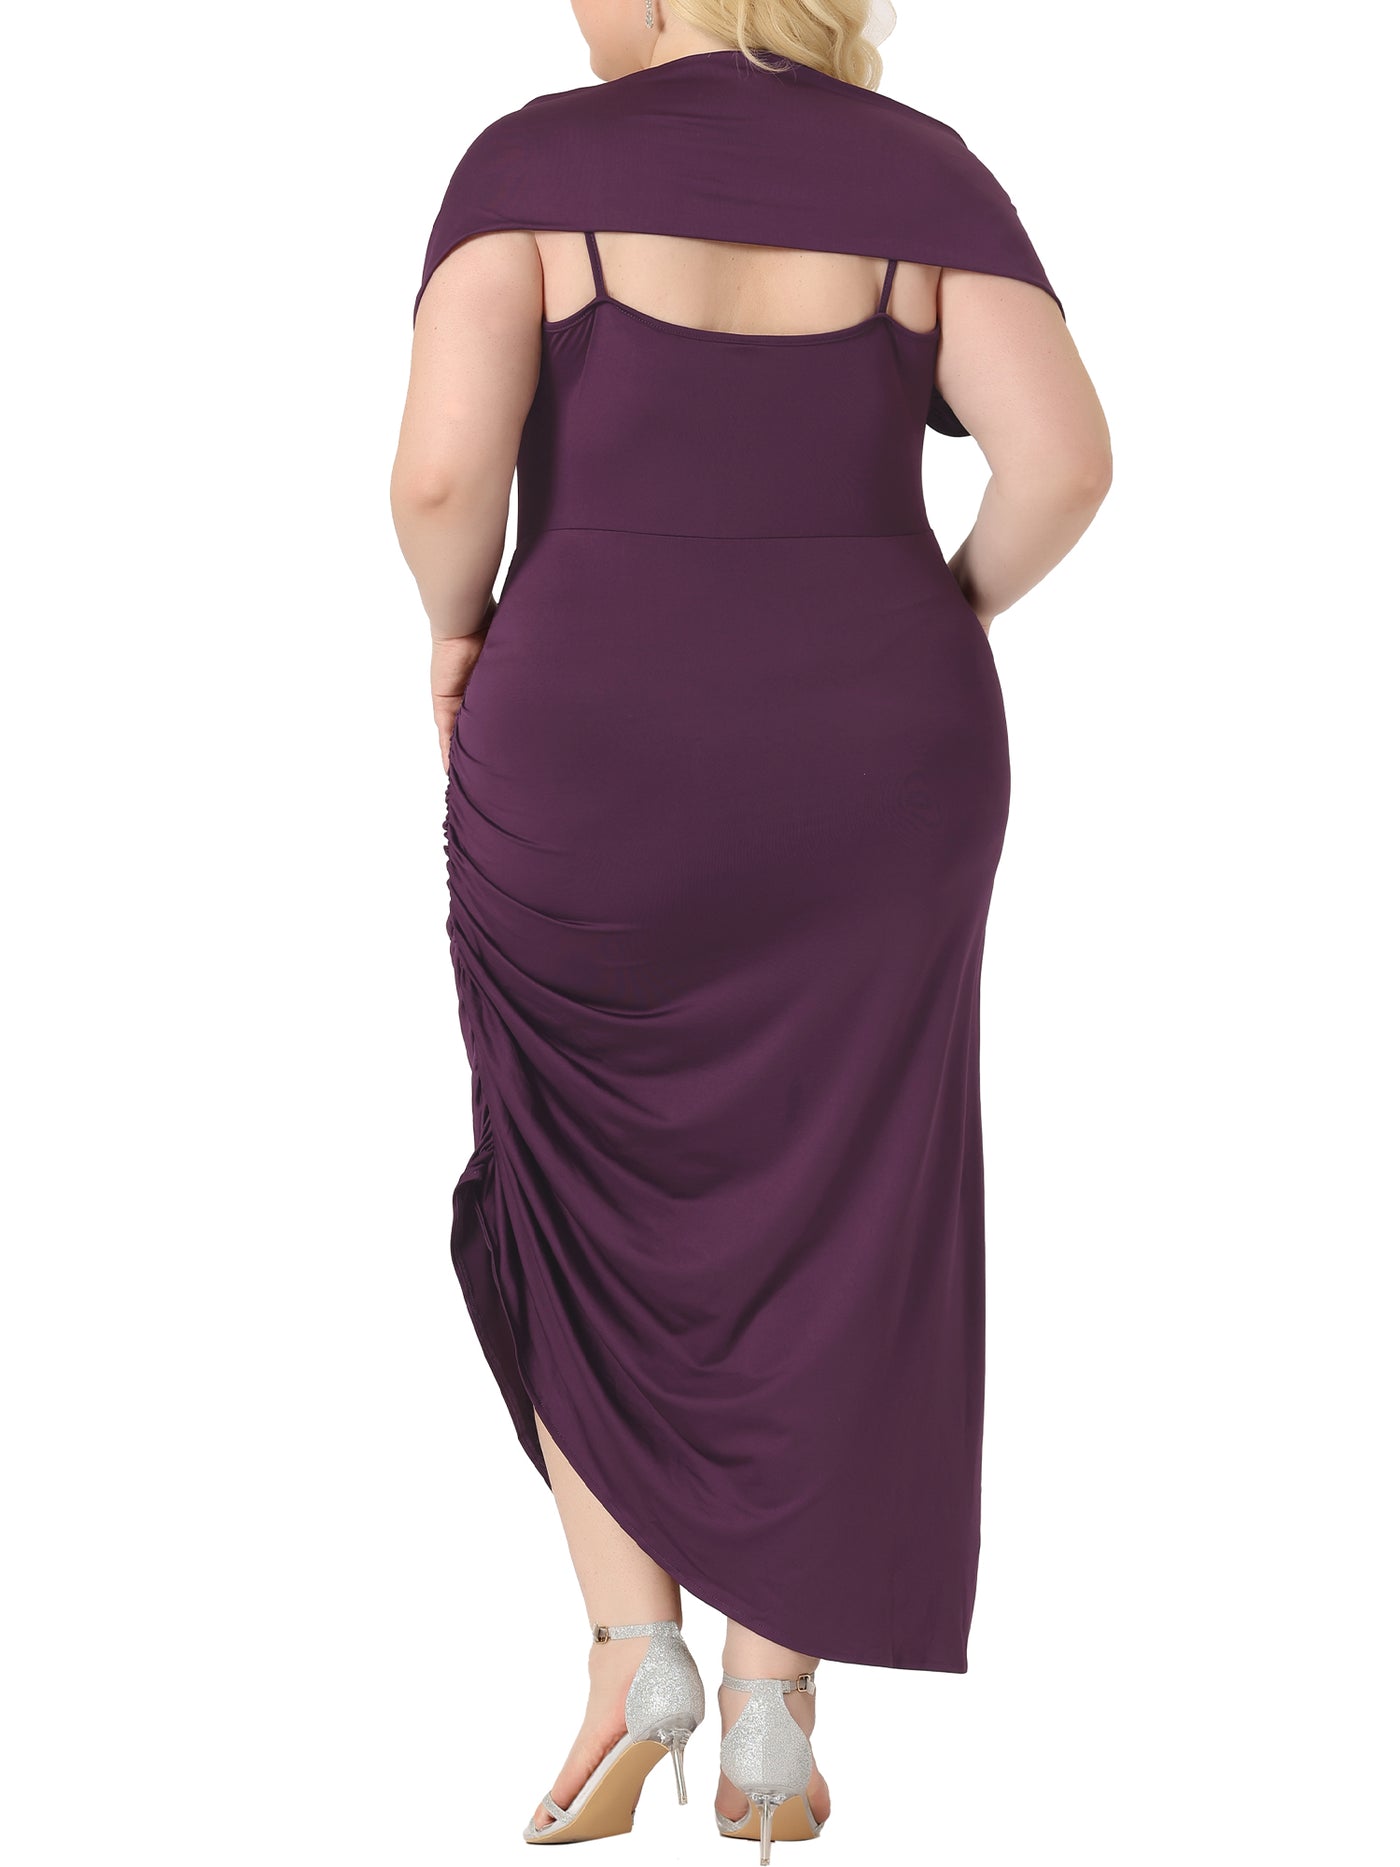 Bublédon Plus Size Bodycon Dress for Women Spaghetti Strap Cowl Neck Ruched Party Cami Dresses with Shawl